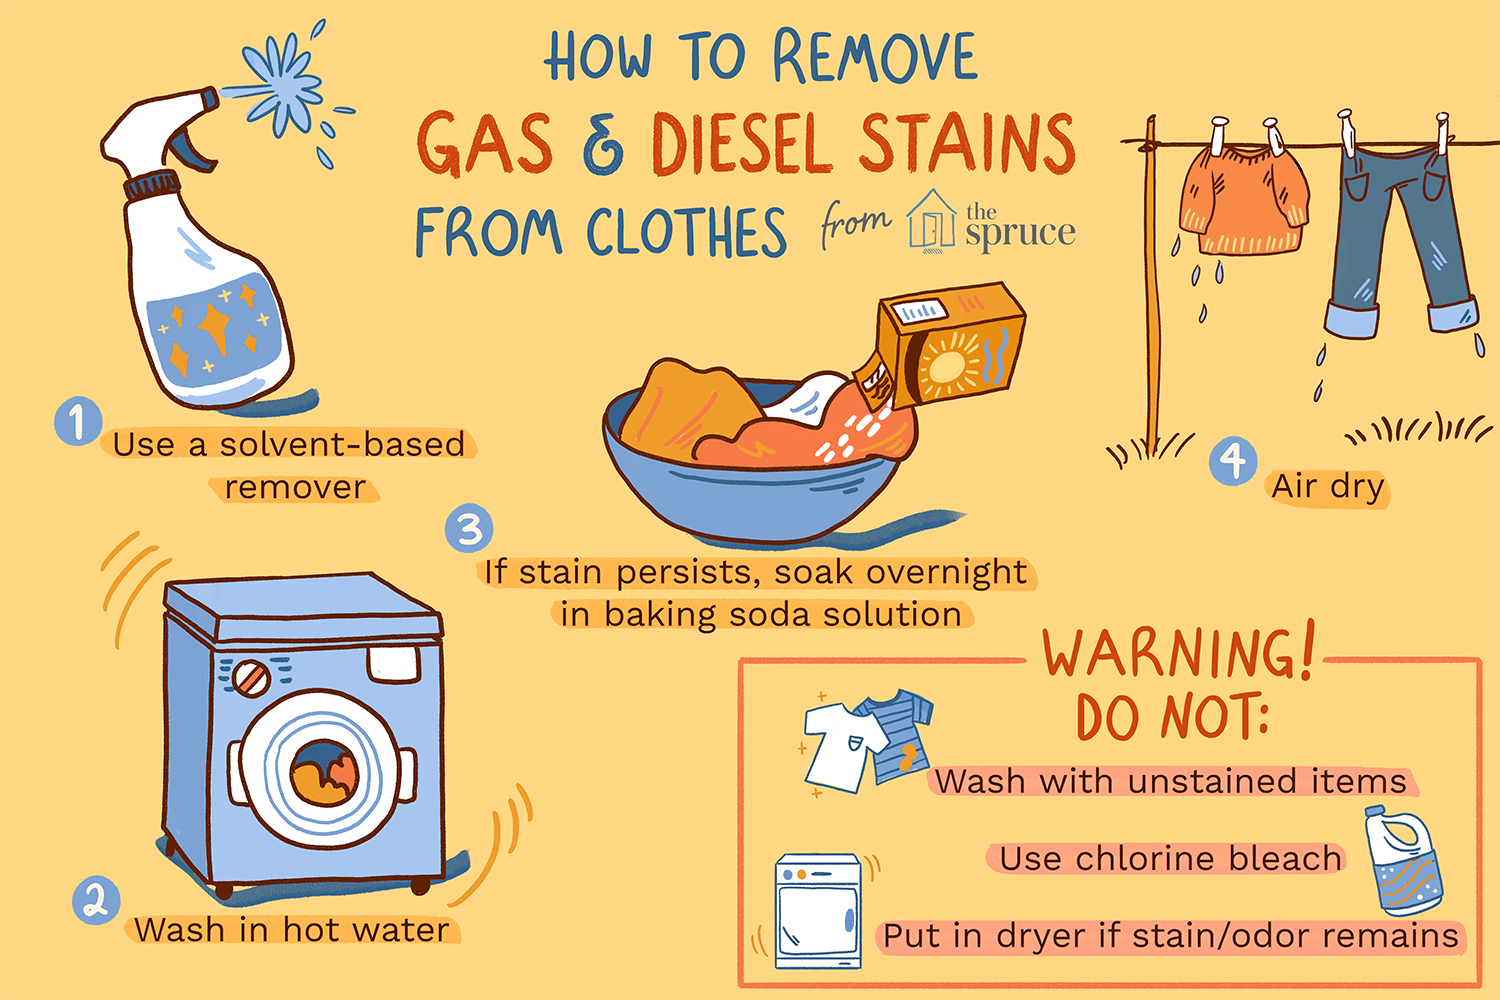 How To Remove Gas And Diesel Stains From Clothes And Carpet,Carnival Glass Bowl Orange